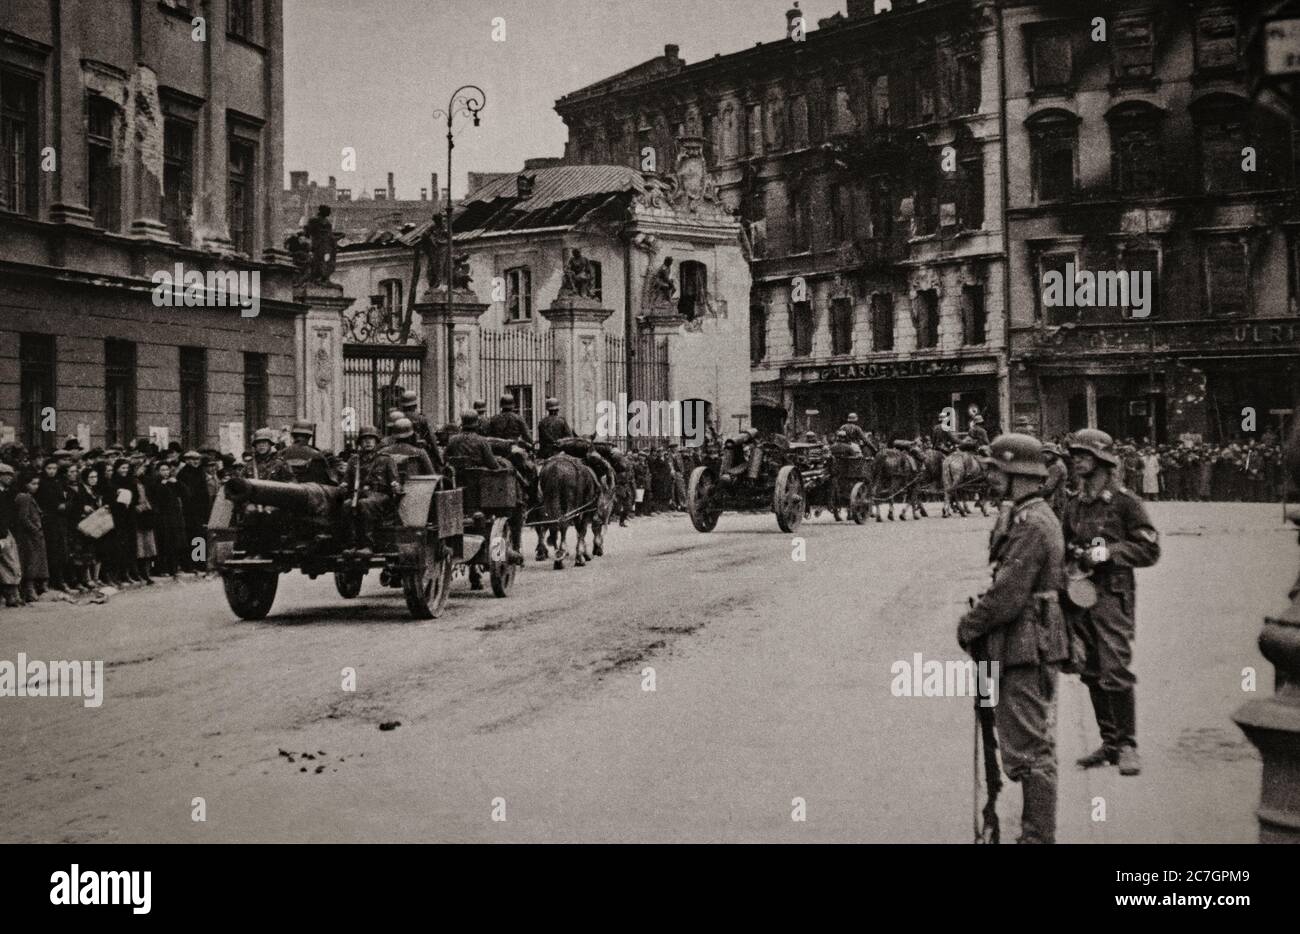 German troops enter Warsaw, Poland. The German invasion began on 1 September 1939, one week after the signing of the Molotov–Ribbentrop Pact between Germany and the Soviet Union, and one day after the Supreme Soviet of the Soviet Union had approved the pact. The Soviets invaded Poland on 17 September. The campaign ended on 6 October with Germany and the Soviet Union dividing and annexing the whole of Poland under the terms of the German–Soviet Frontier Treaty. Stock Photo